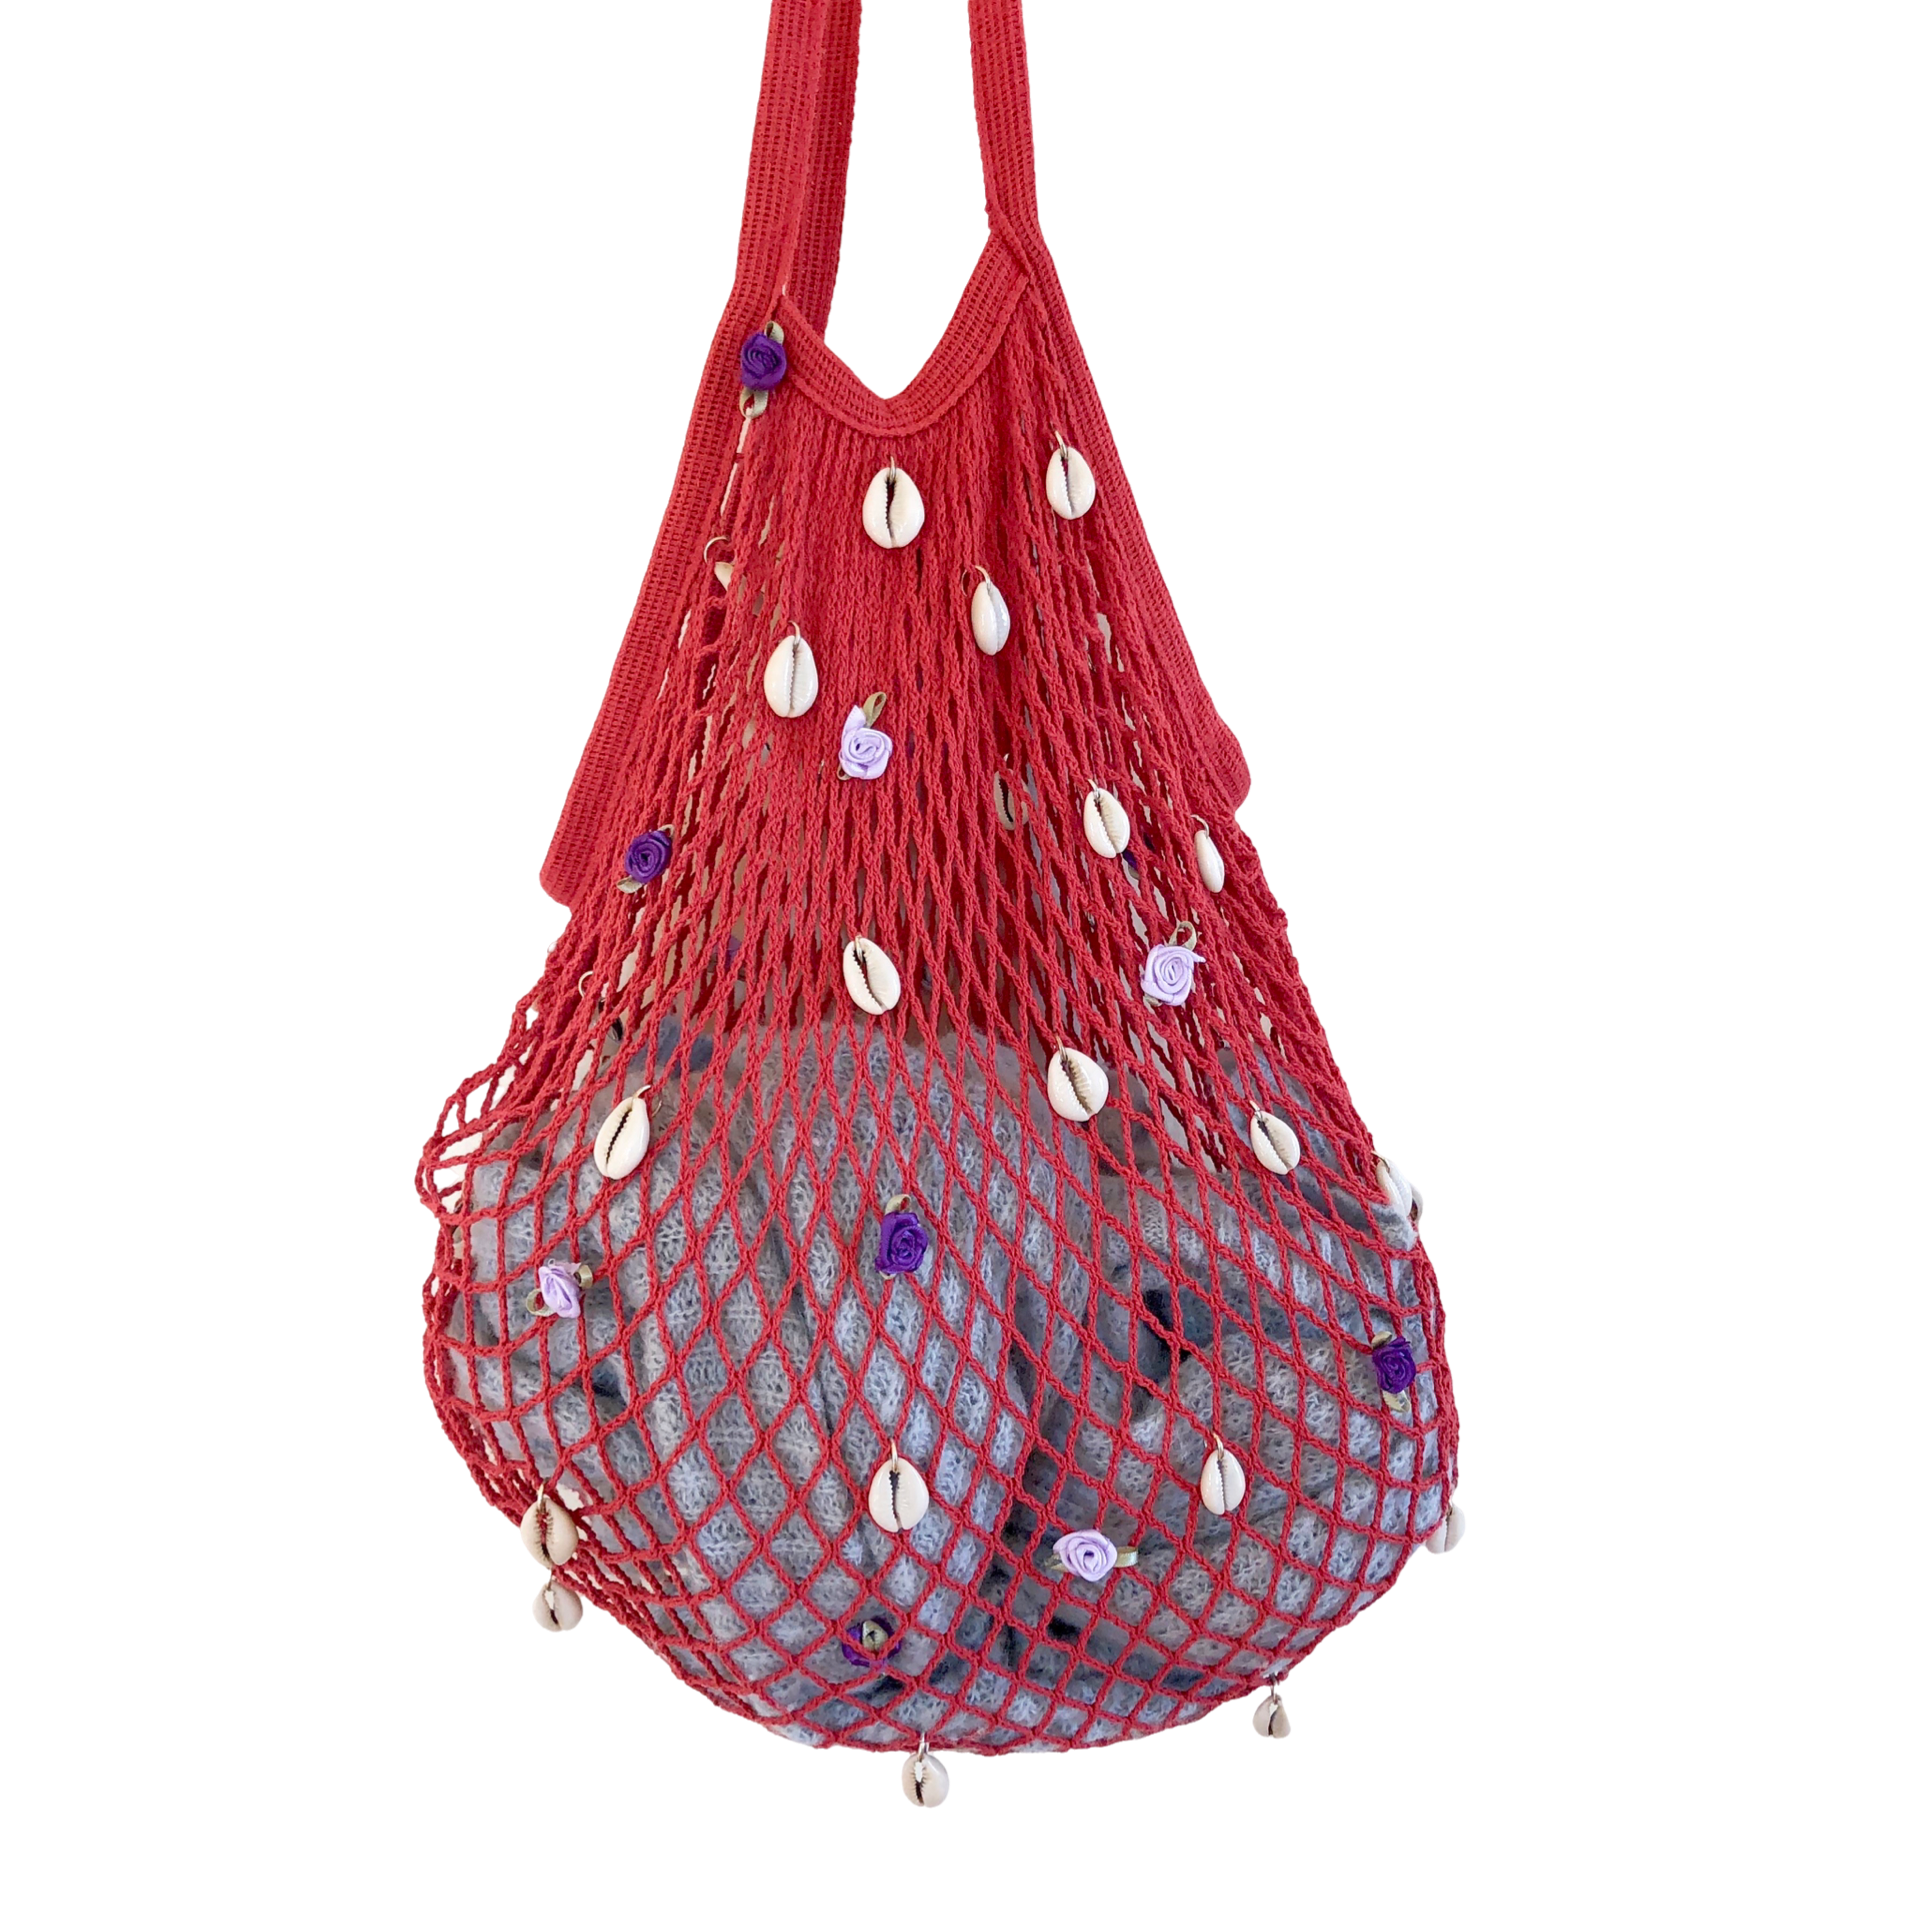 Amore Netted Bag